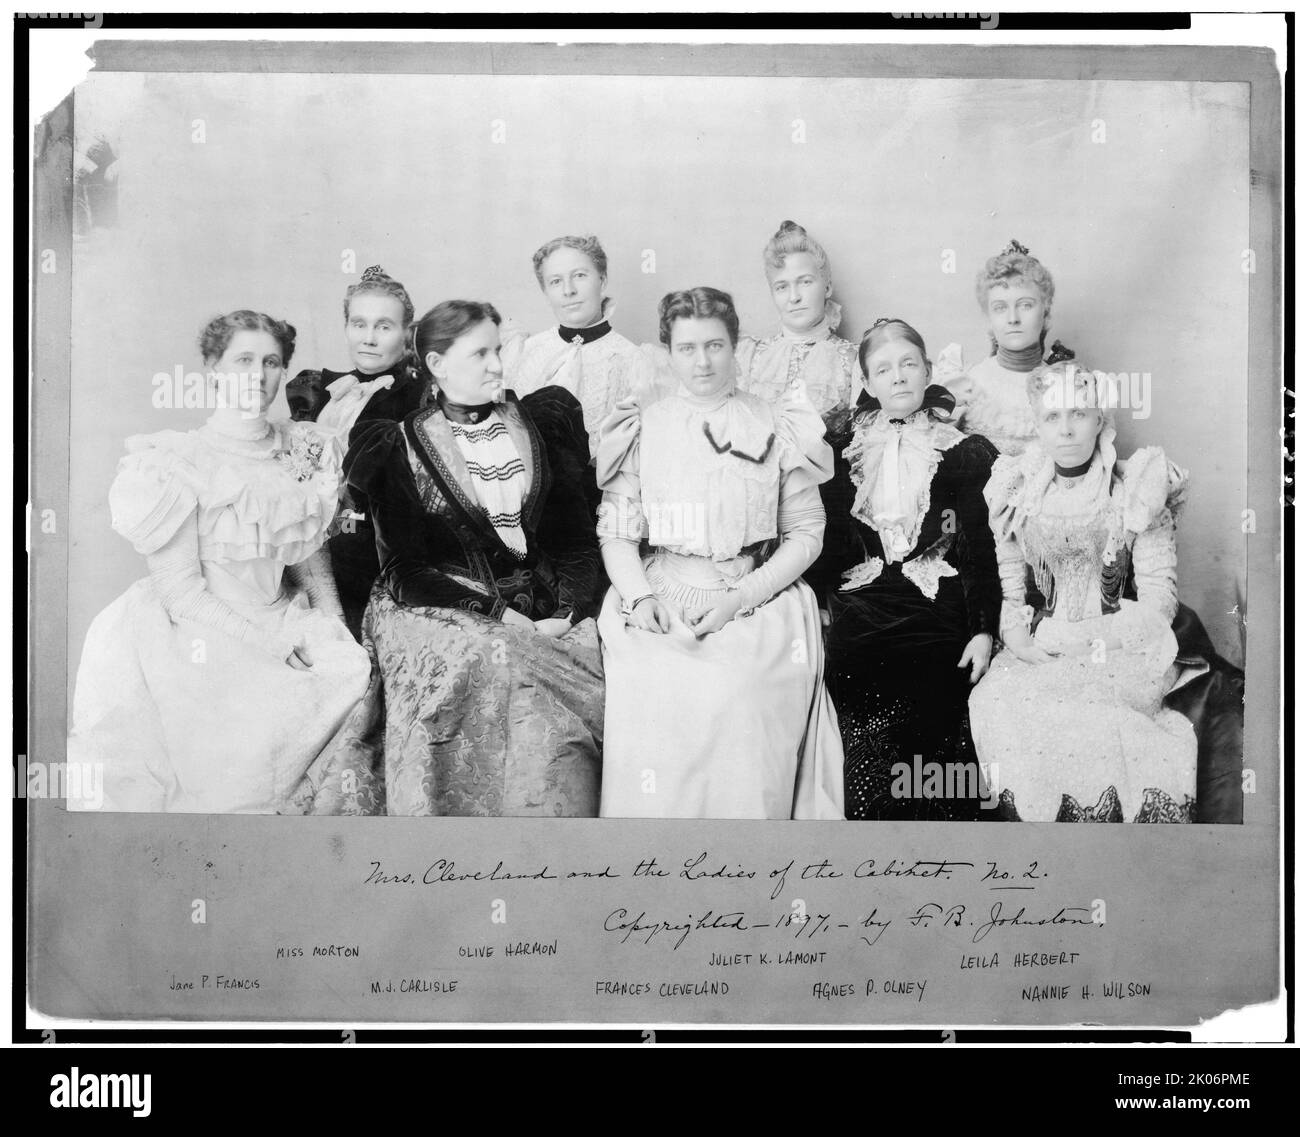 Mrs. Cleveland and the ladies of the Cabinet, no. 2, c1897. Frances Folsom Cleveland and the wives of cabinet members. ['Jane P. Francis; Miss Morton; M.J. Carlisle; Olive Harmon; Frances Cleveland; Juliet K. Lamont; Agnes P. Olney; Leila Herbert; Nannie H. Wilson'. Frances Cleveland, wife of President Grover Cleveland, became First Lady at 21. She is the youngest wife of a sitting president]. Stock Photo